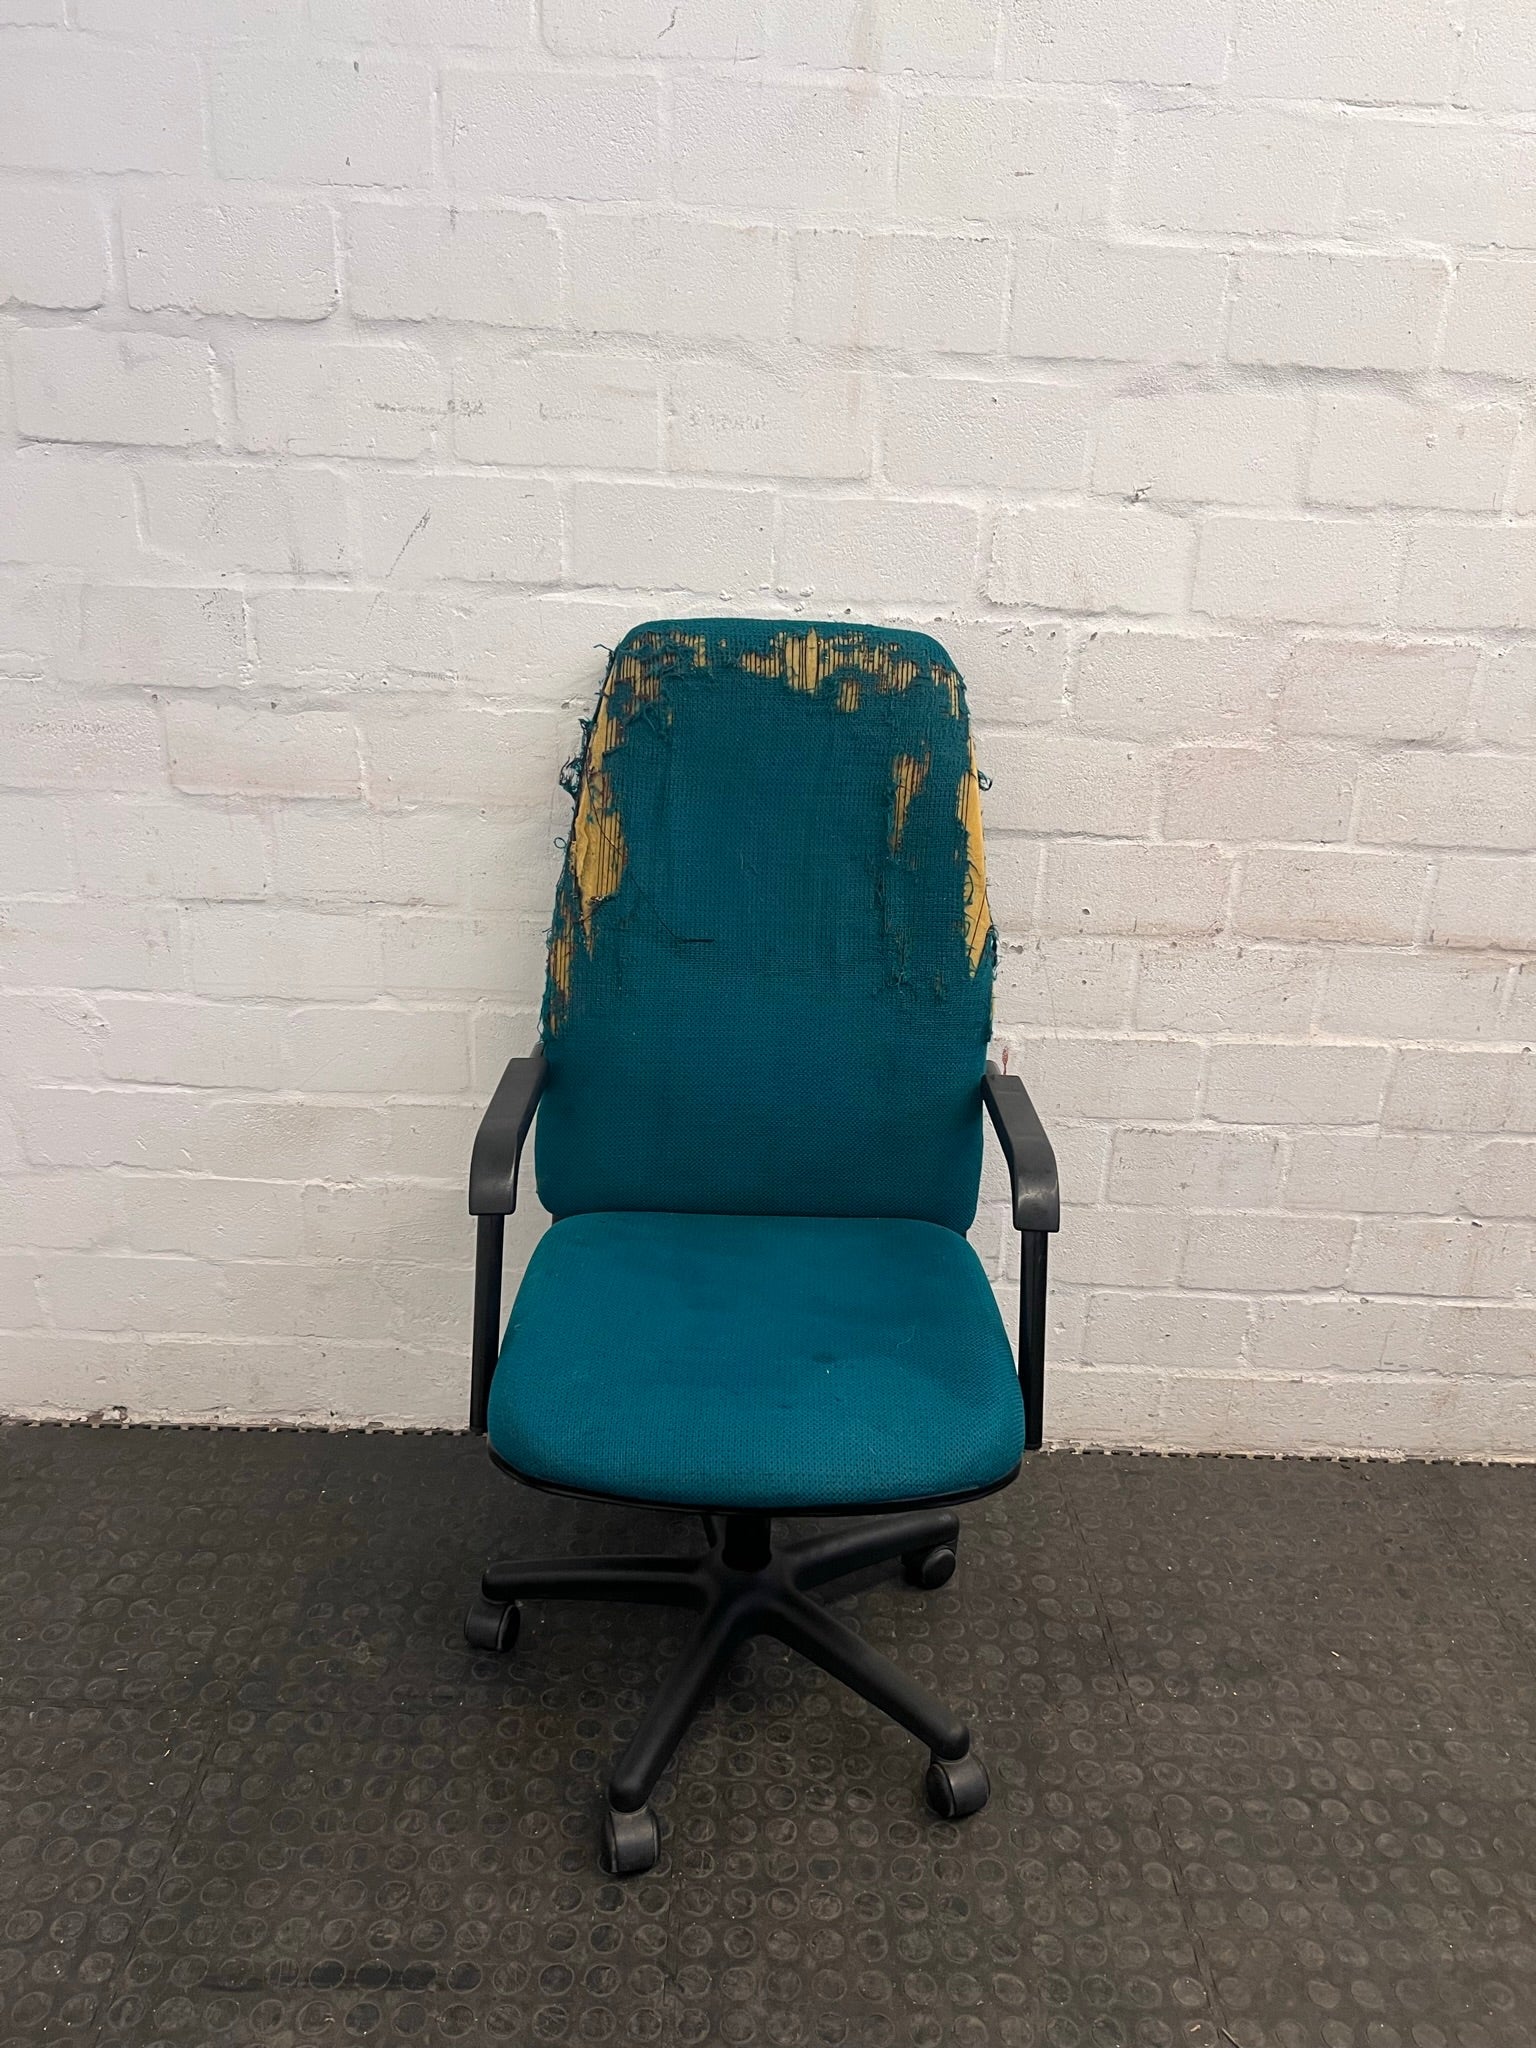 Teal Office Armchair on Wheels (Torn) - REDUCED